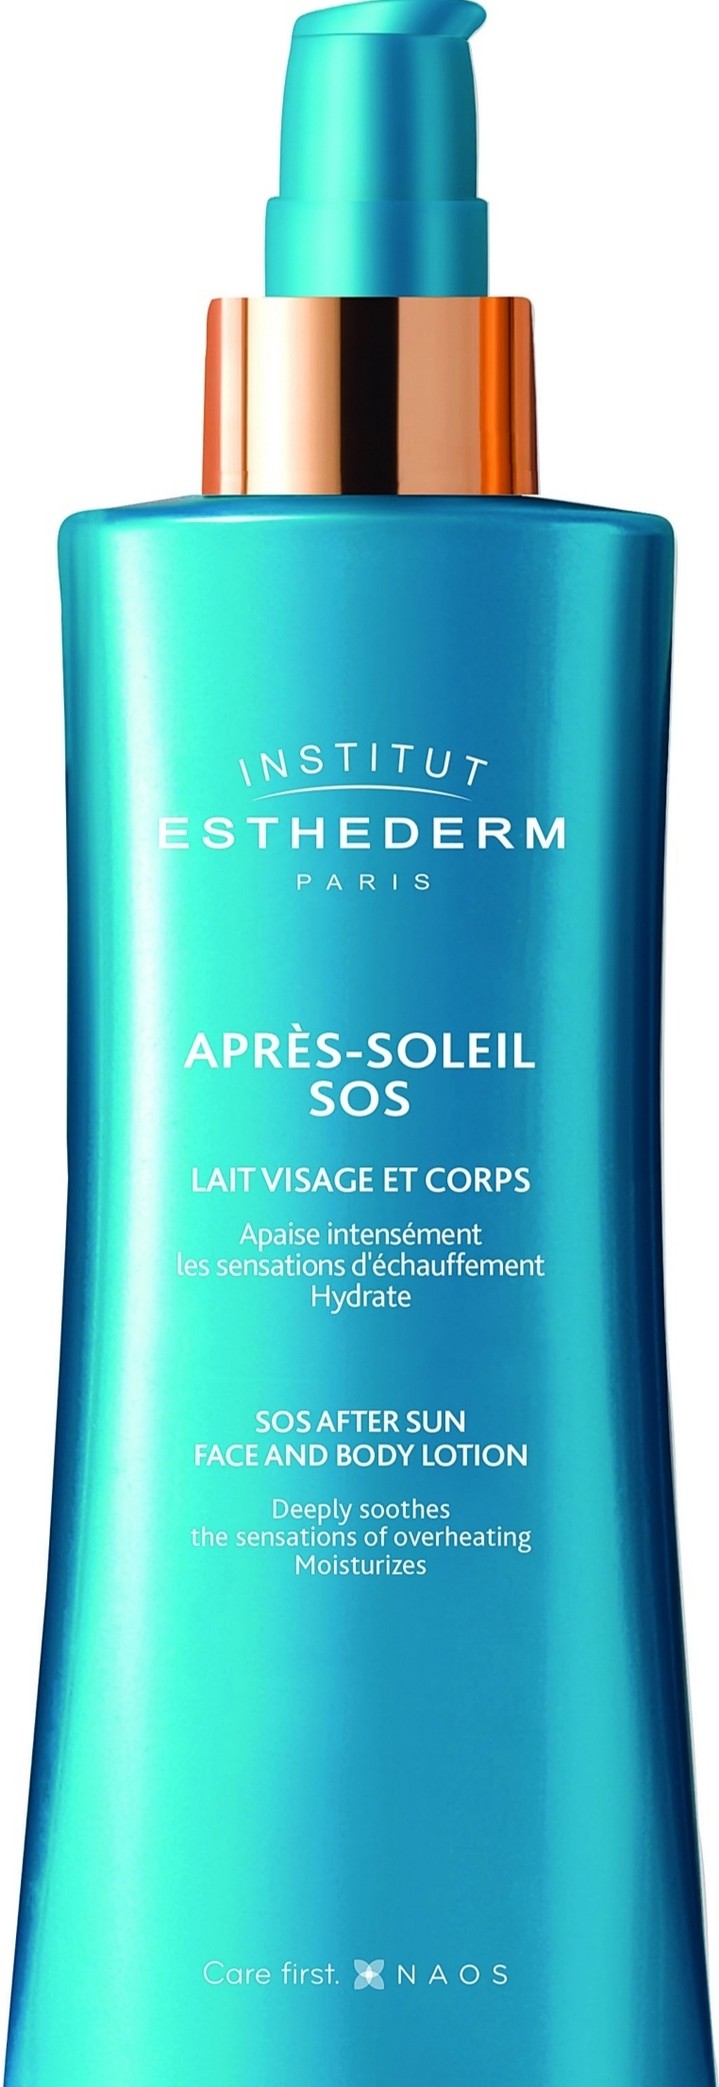 Institut Esthederm SOS After Sun Face and Body Lotion, 5538 .